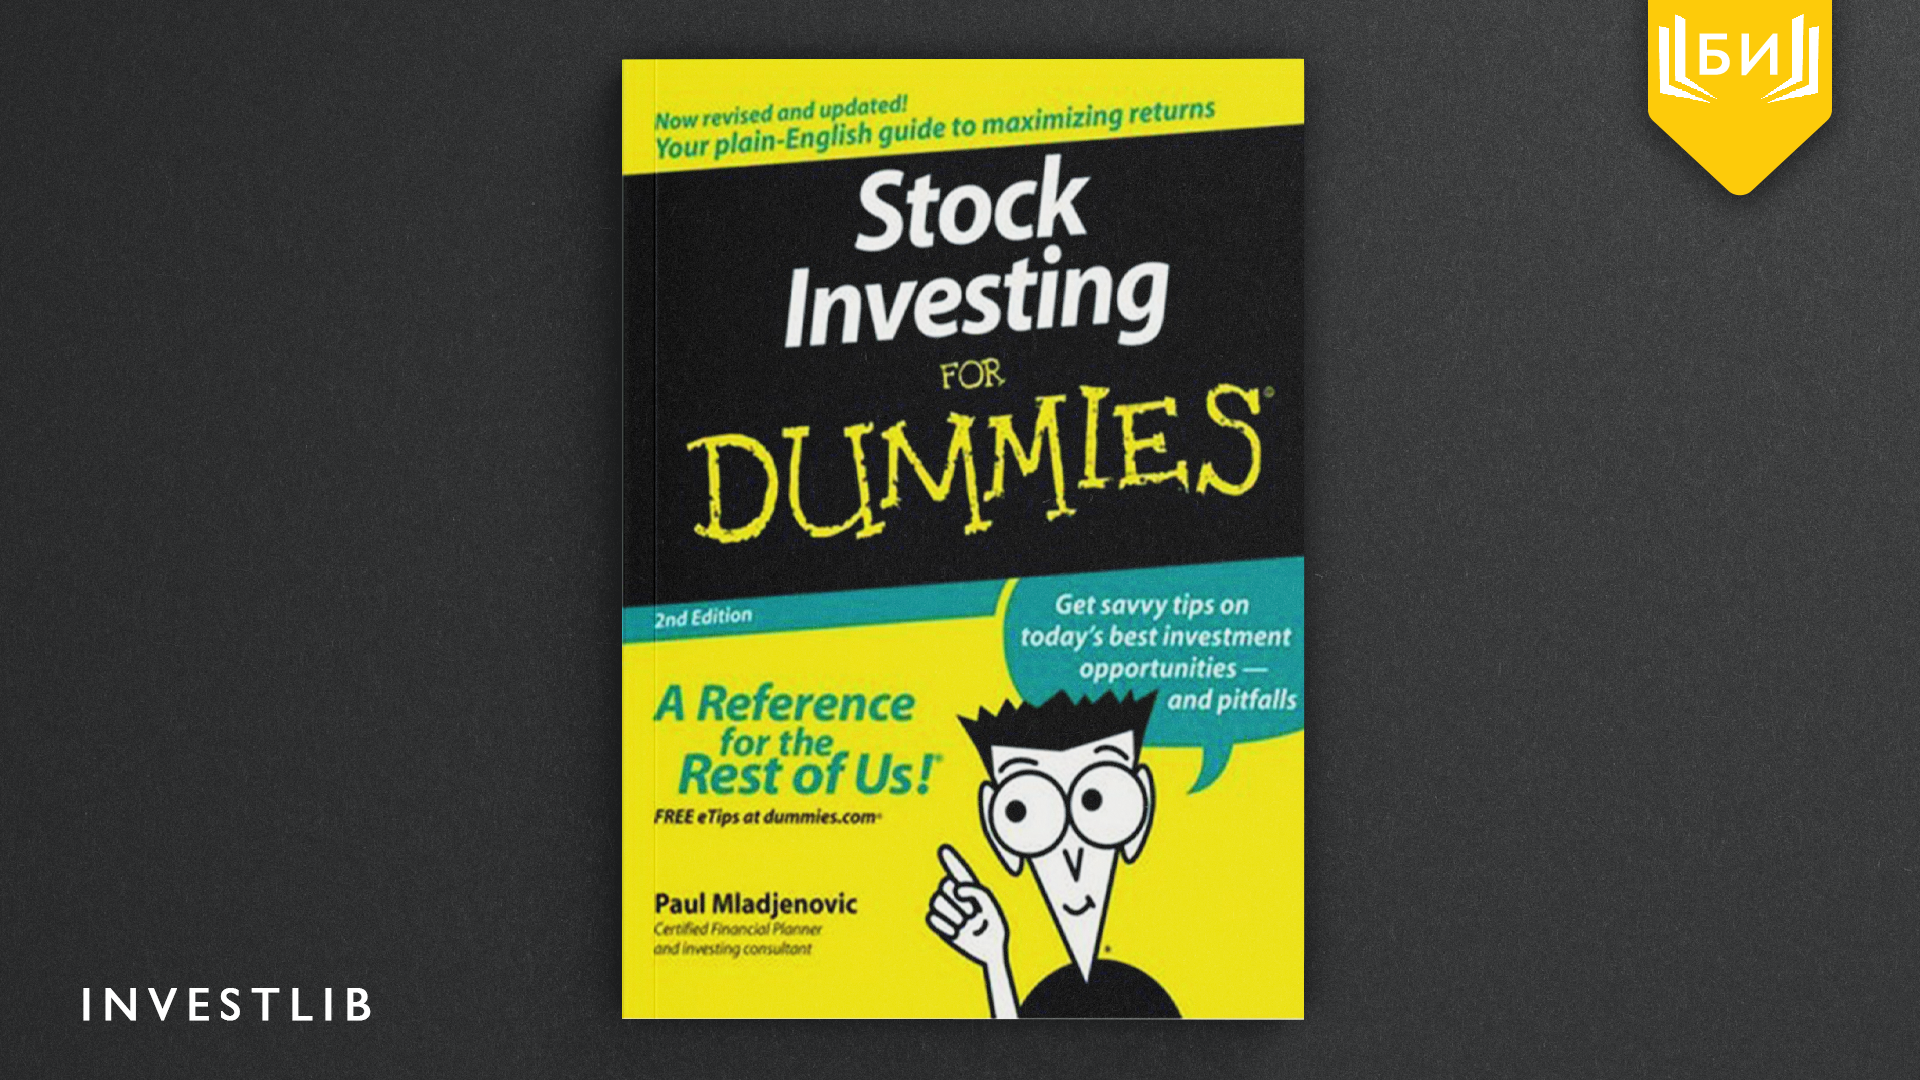 investing online for dummies 8th edition pdf